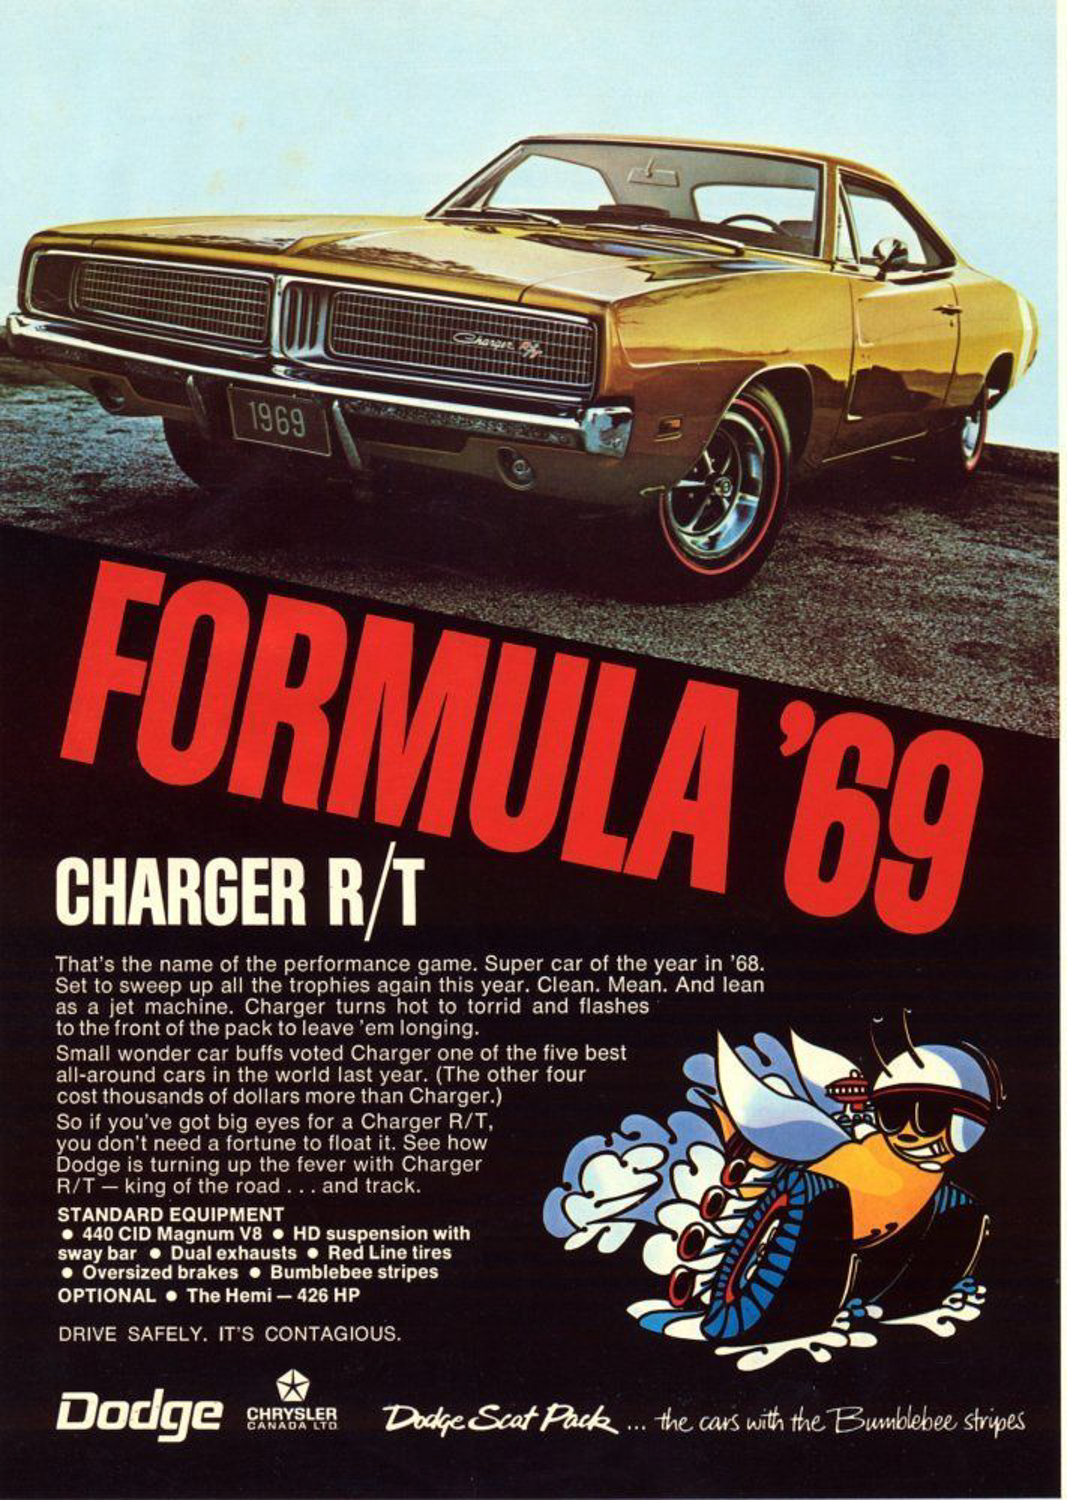 Dodge changed the look of the Charger in 1969, but it did little to help the aero issues it had on the race track. 